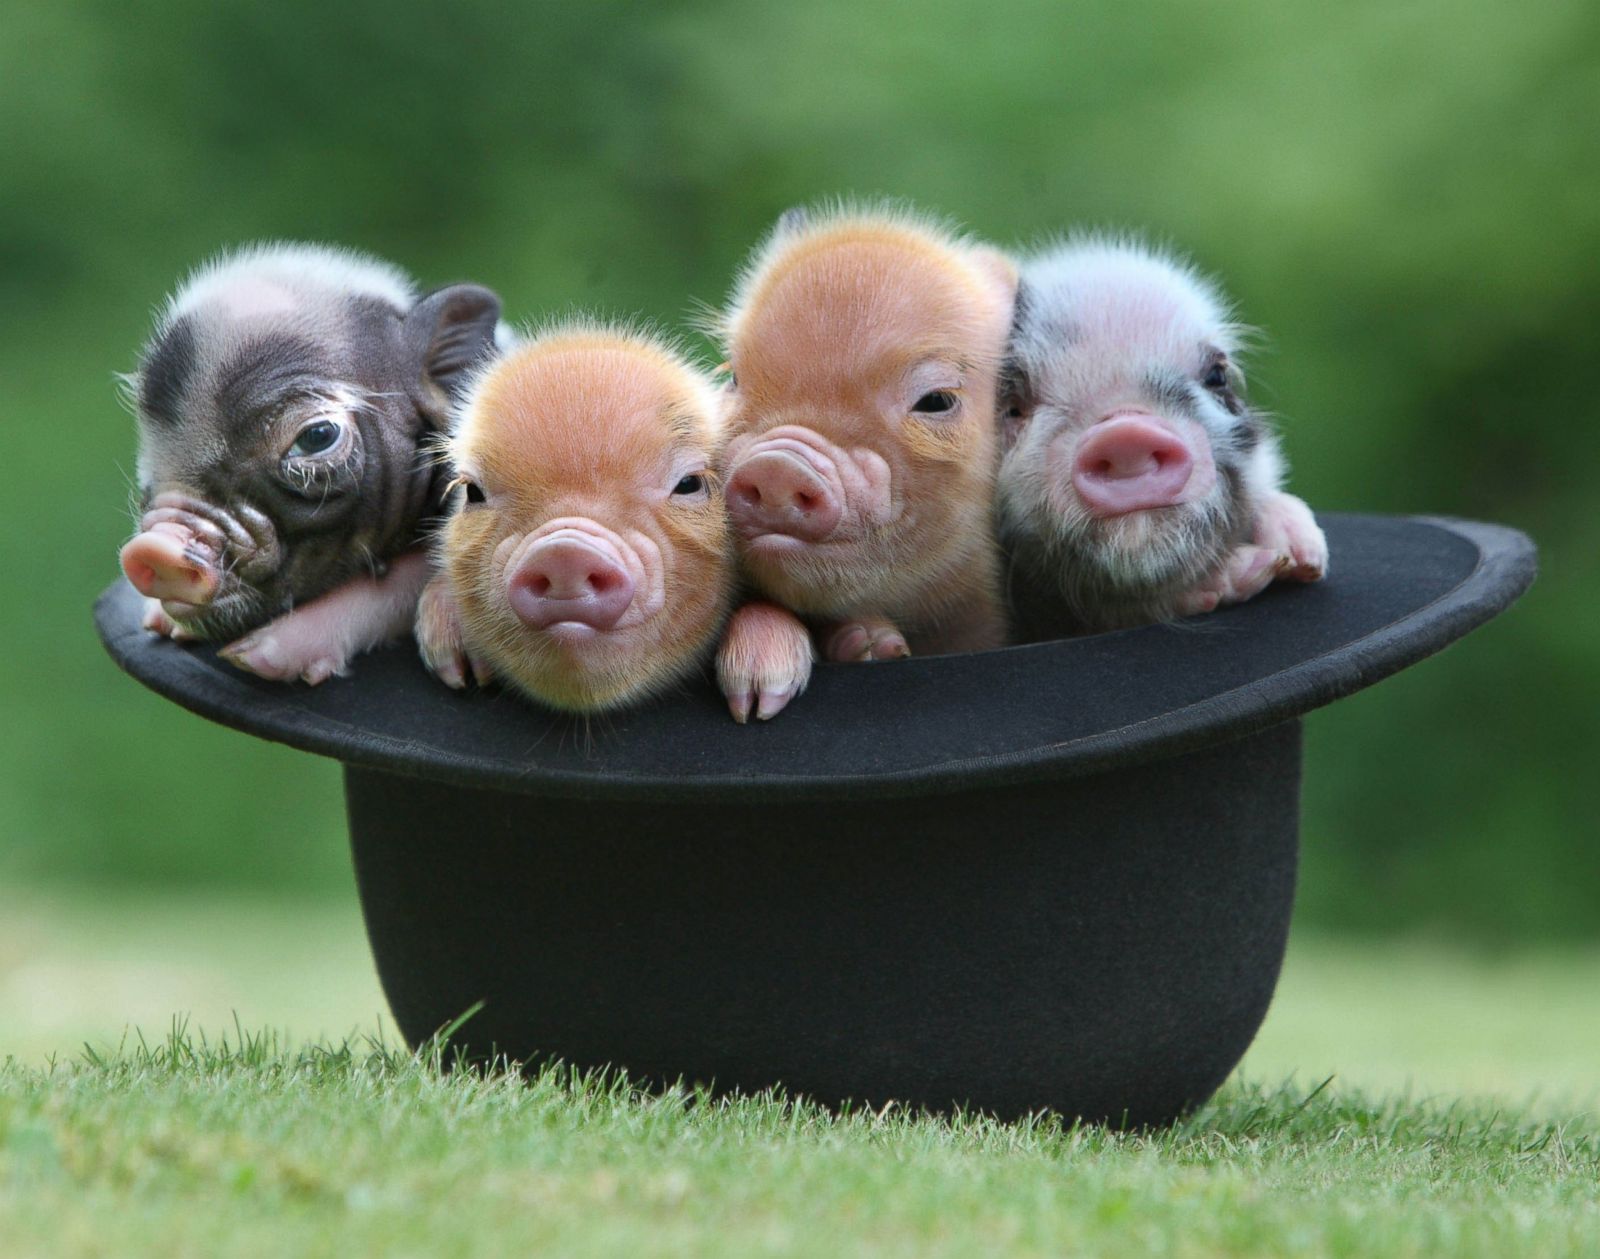 micro pigs full grown size